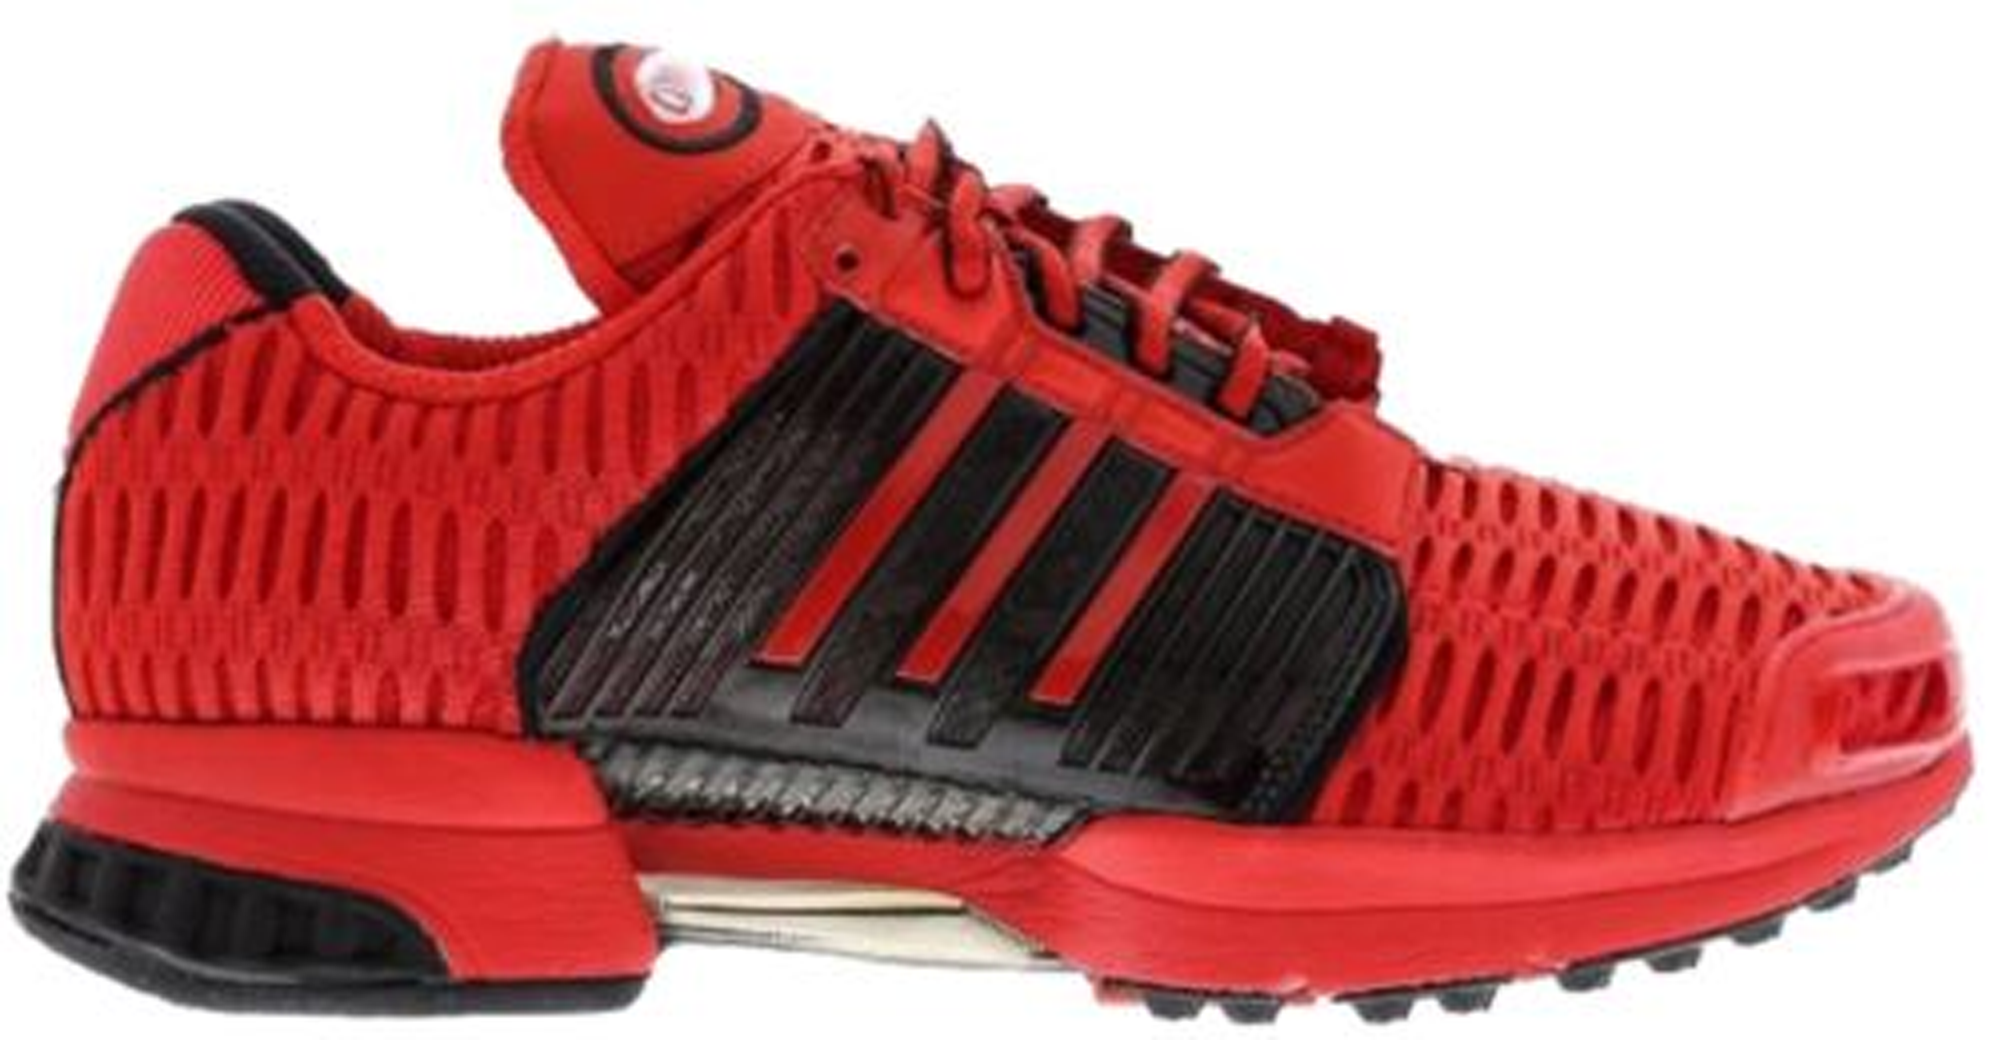 adidas climacool 1 running shoes